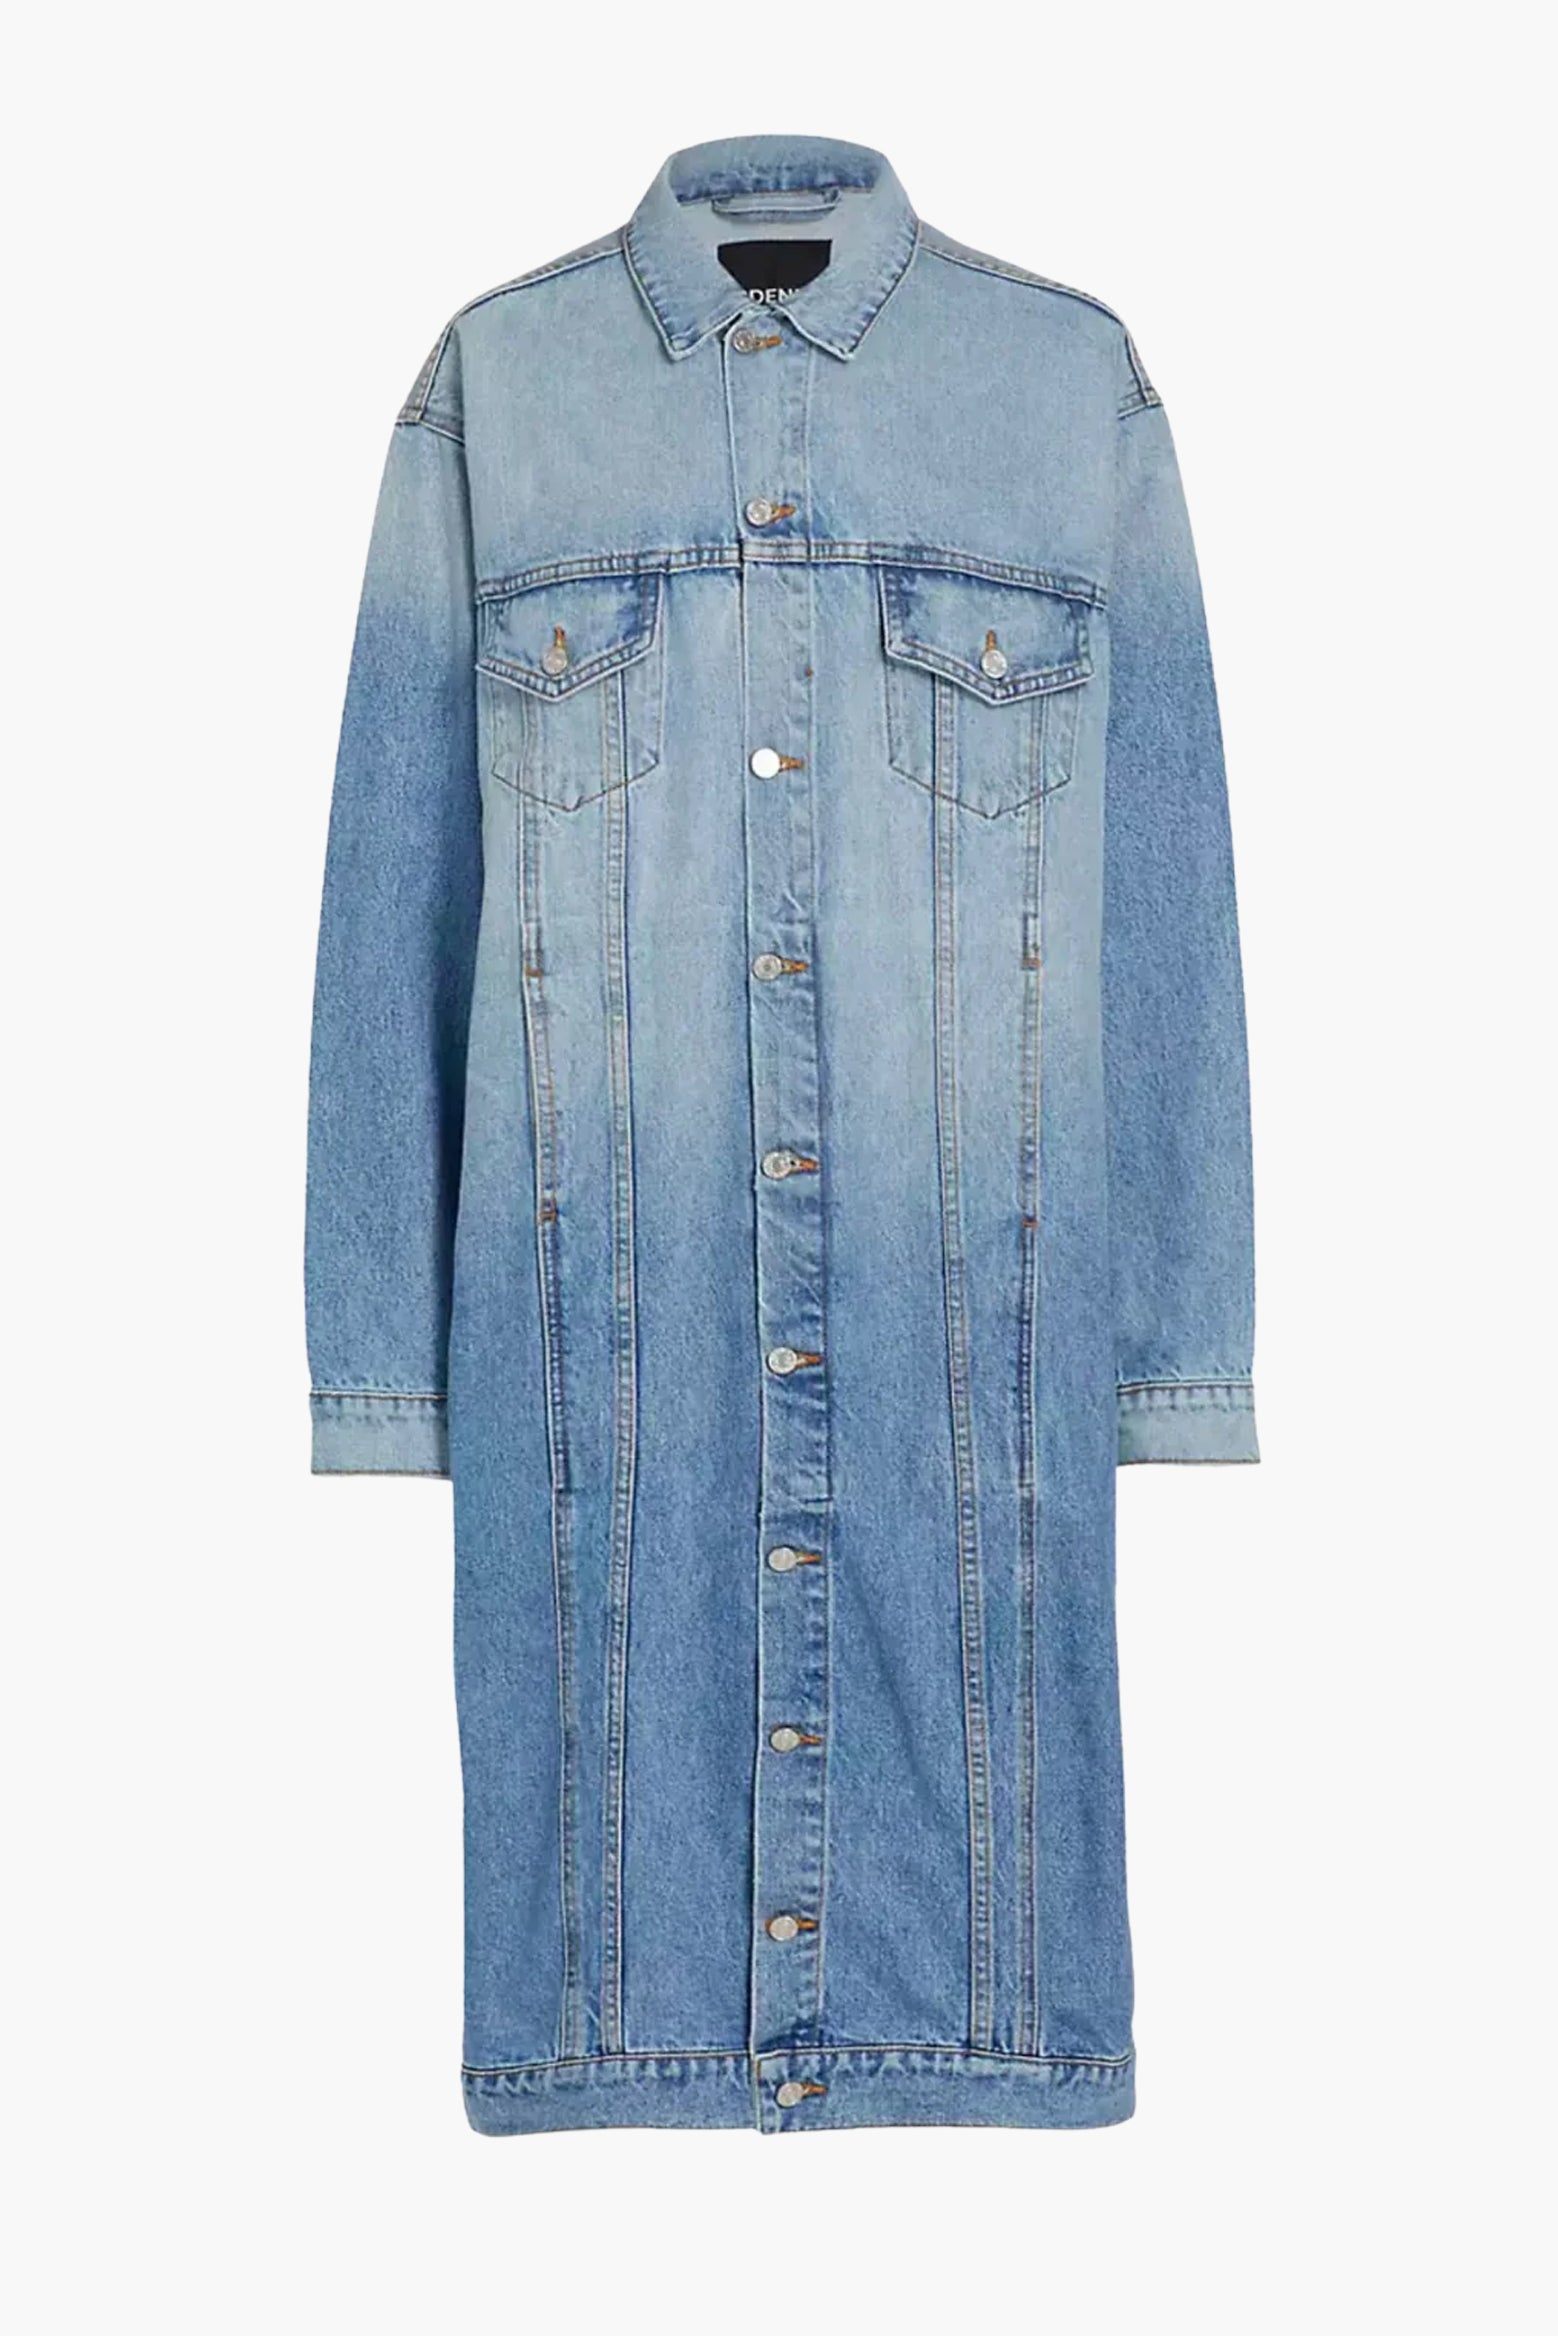 EB Denim Webster Trench in Luca available at The New Trend Australia. 